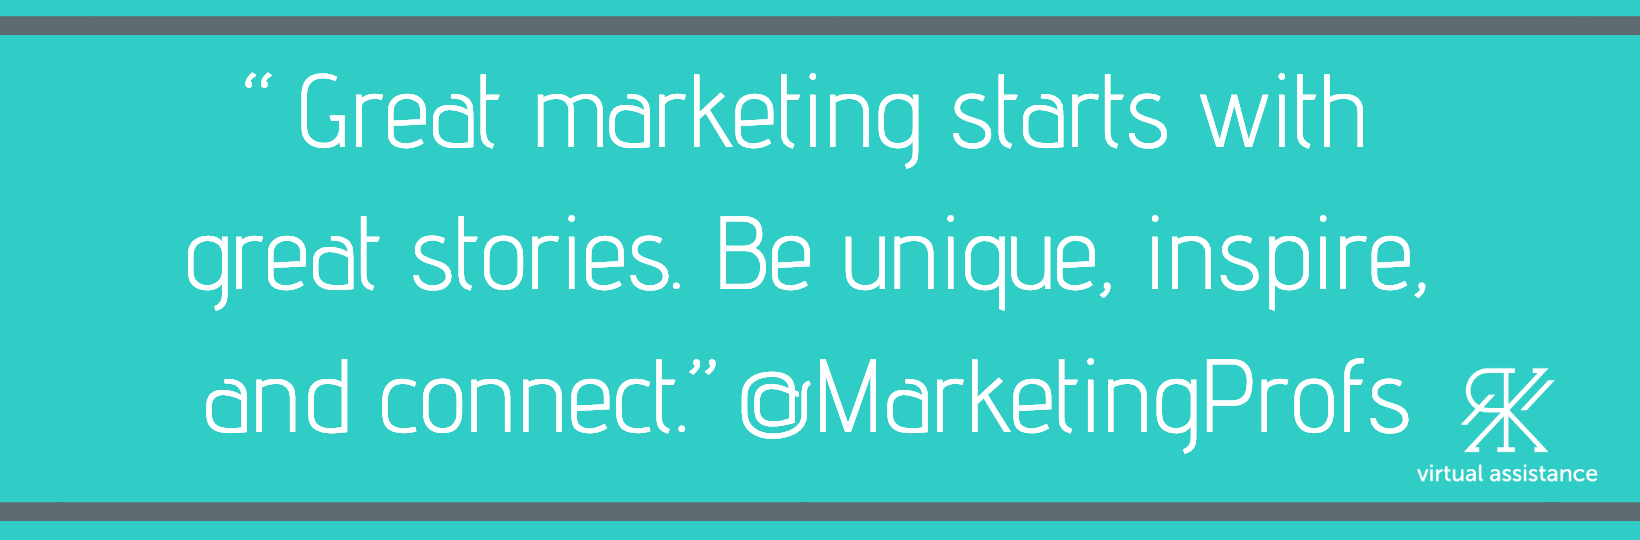 “Great marketing starts with great stories. Be unique, inspire, and connect.”